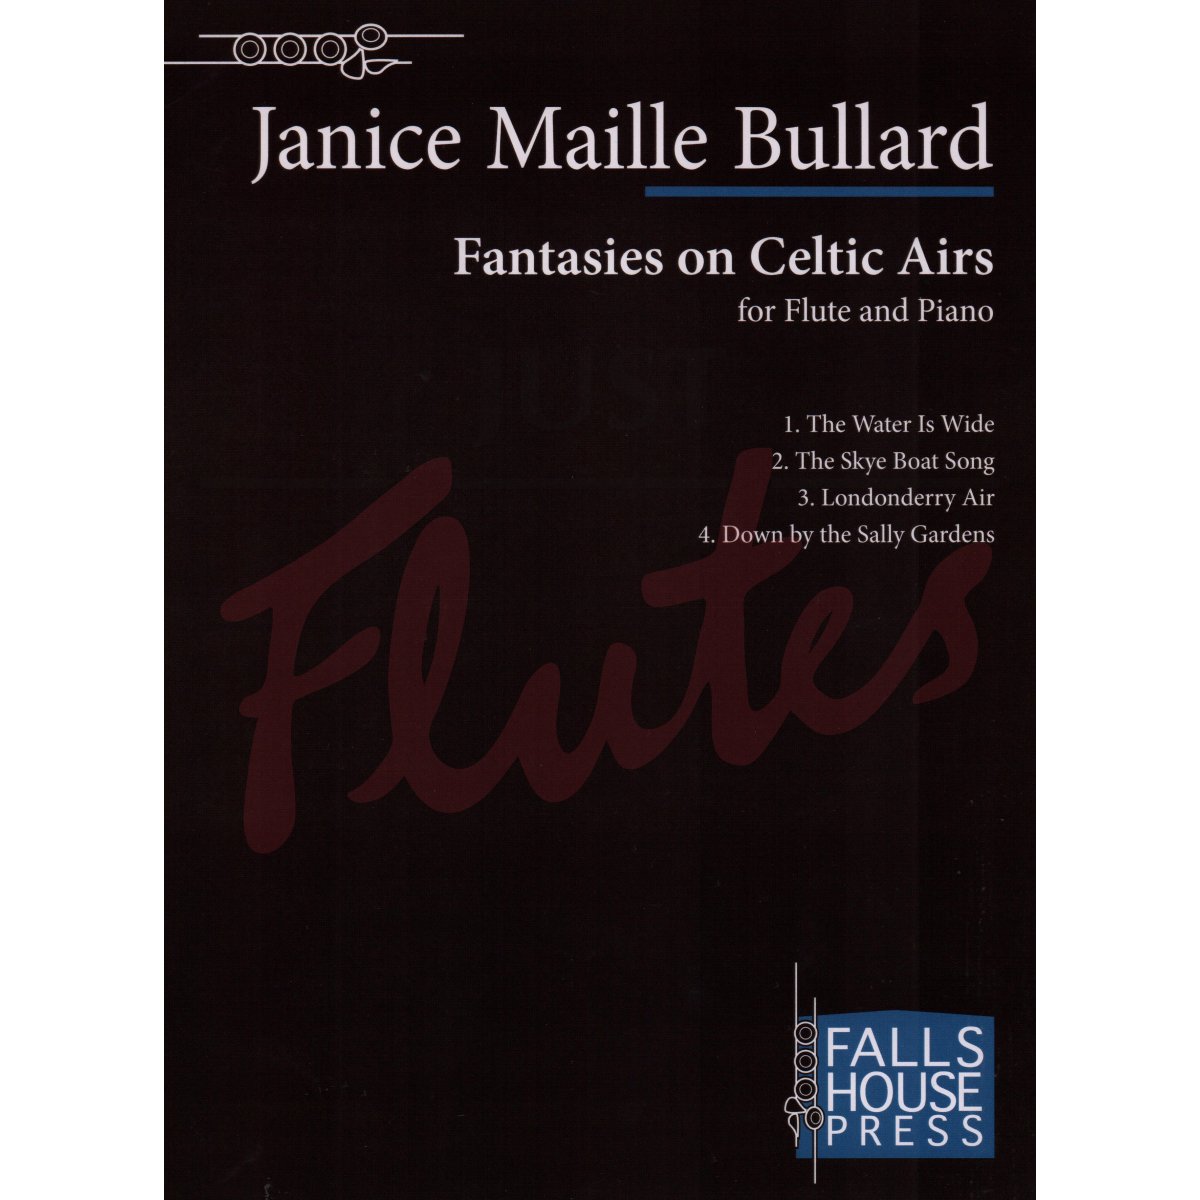 Fantasies on Celtic Airs for Flute and Piano